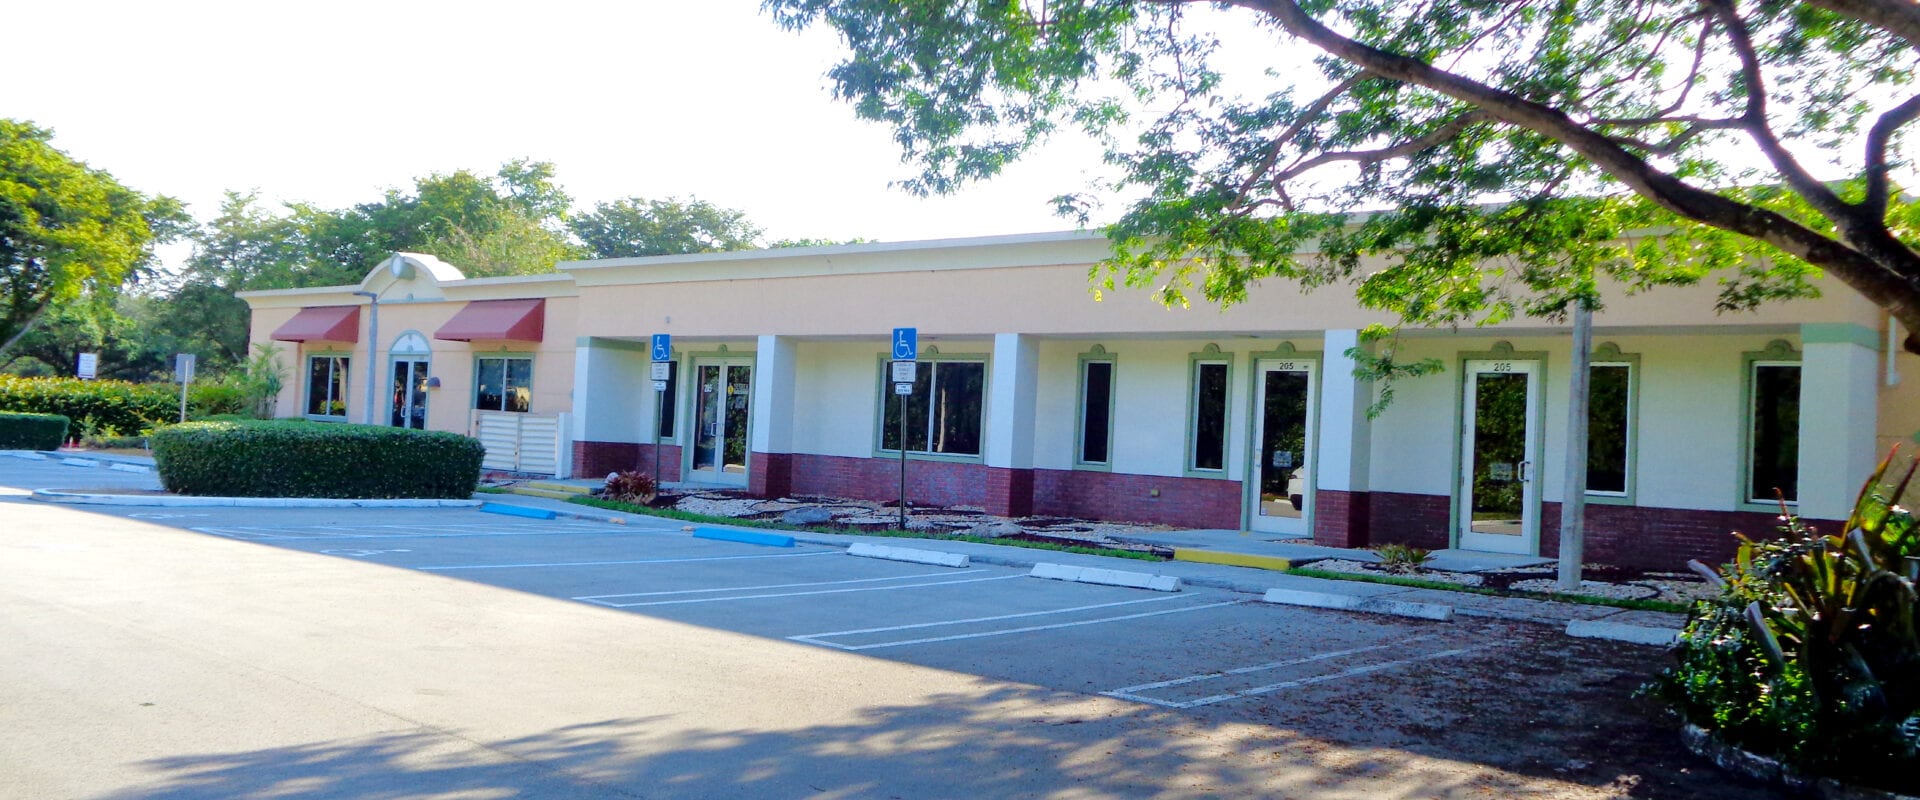 For Lease 6,000 SF Class “A” Office